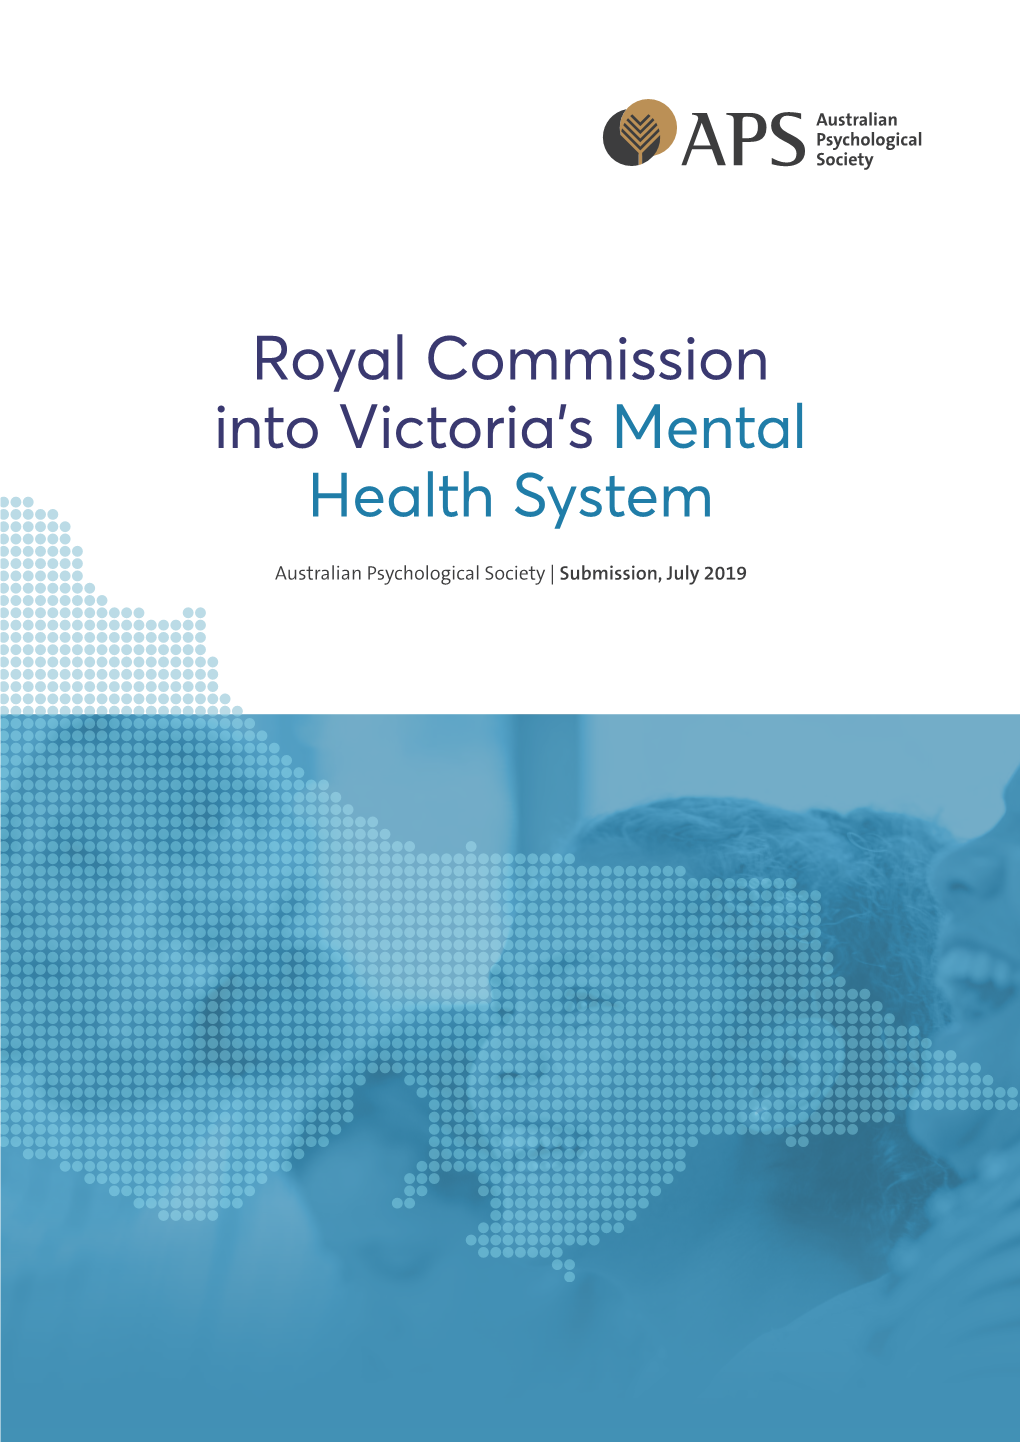 Royal Commission Into Victoria's Mental Health System